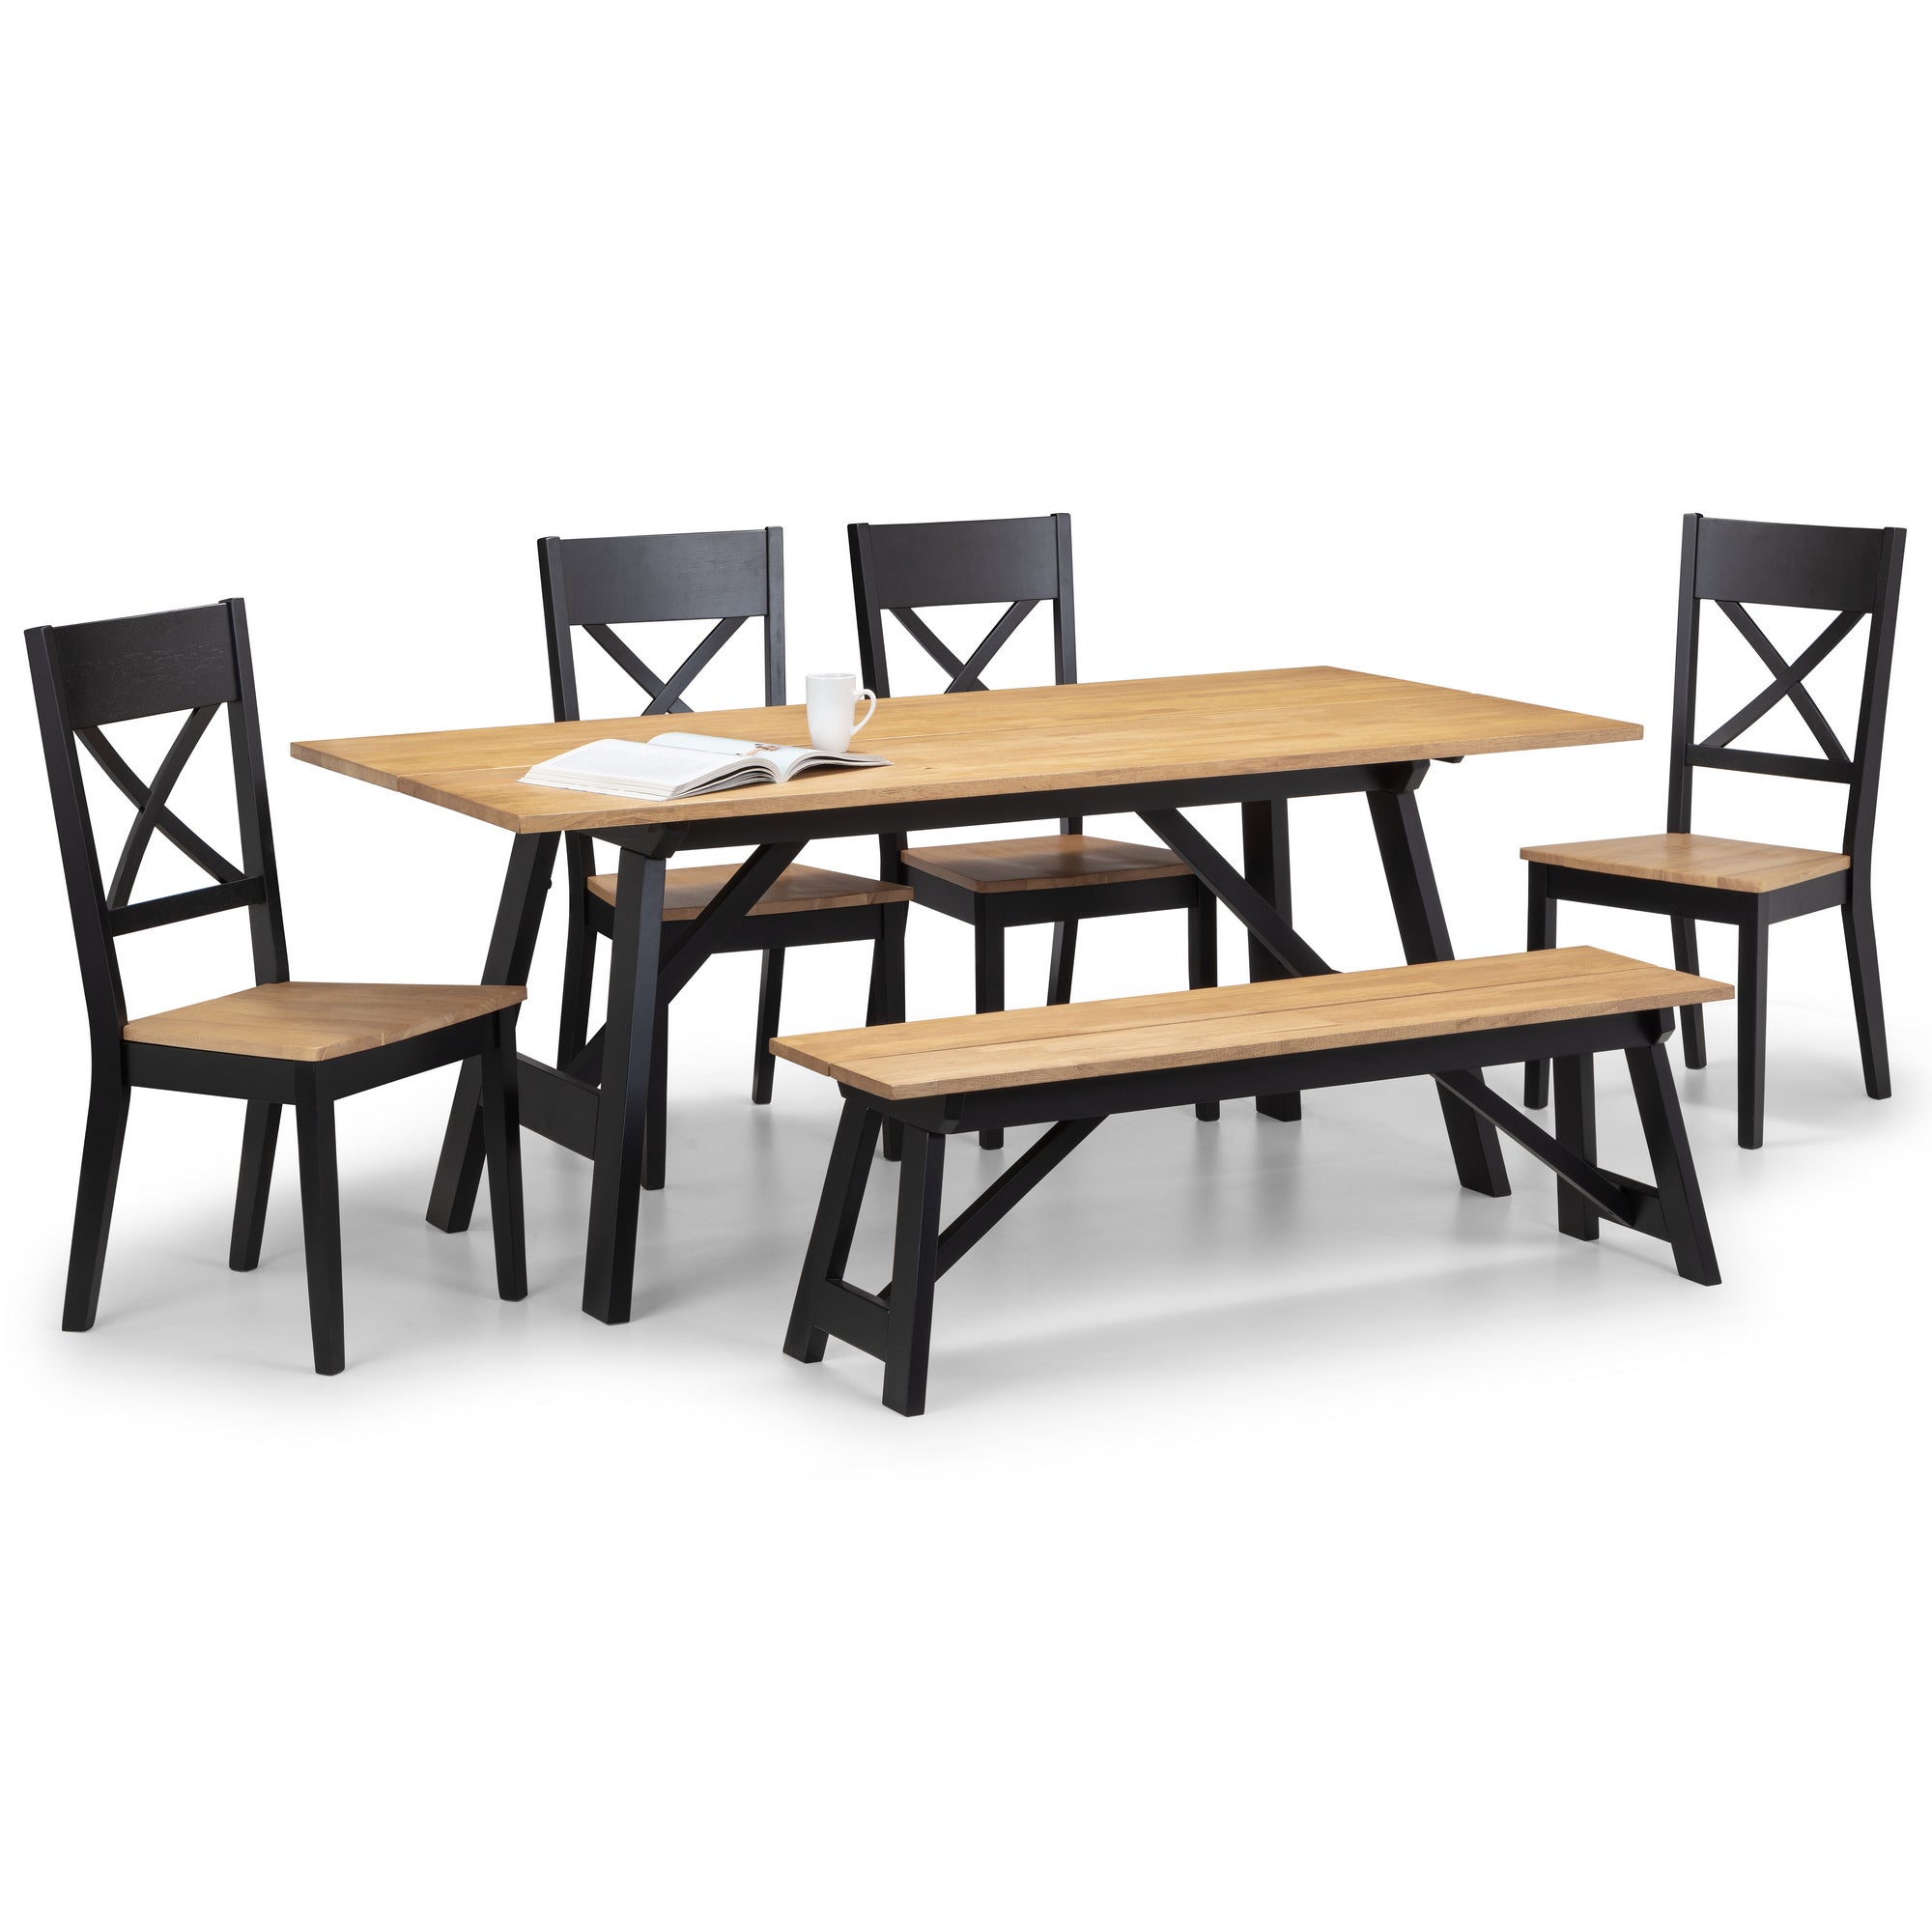 Hockley Rectangular Dining Table with 4 Chairs and Bench, Black Black